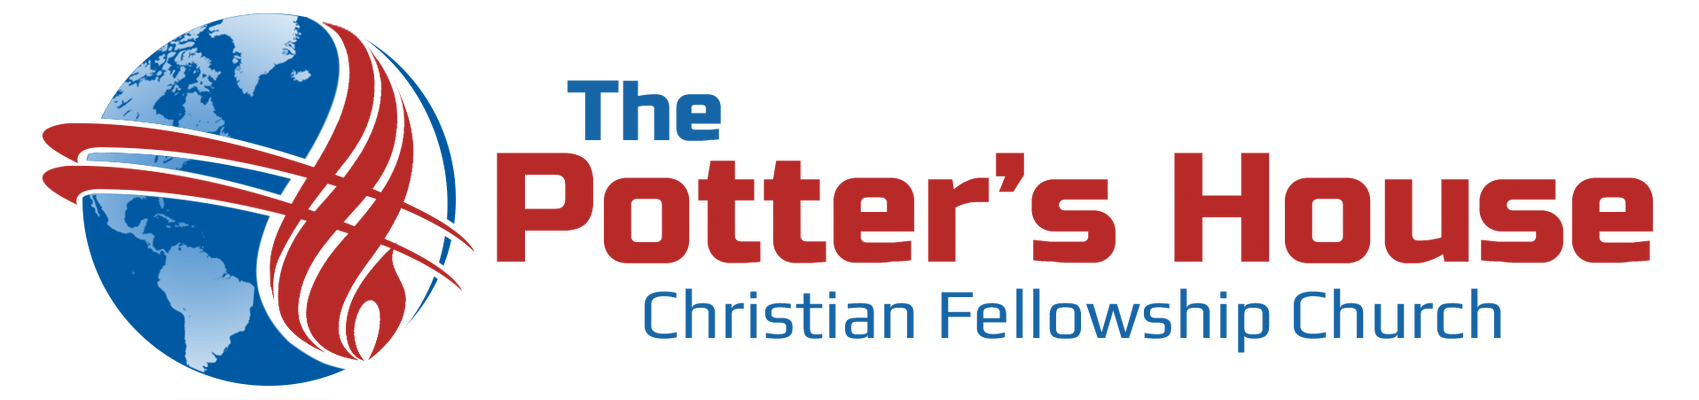 Potter's House Logo - THE POTTER'S HOUSE (FEDERAL WAY)